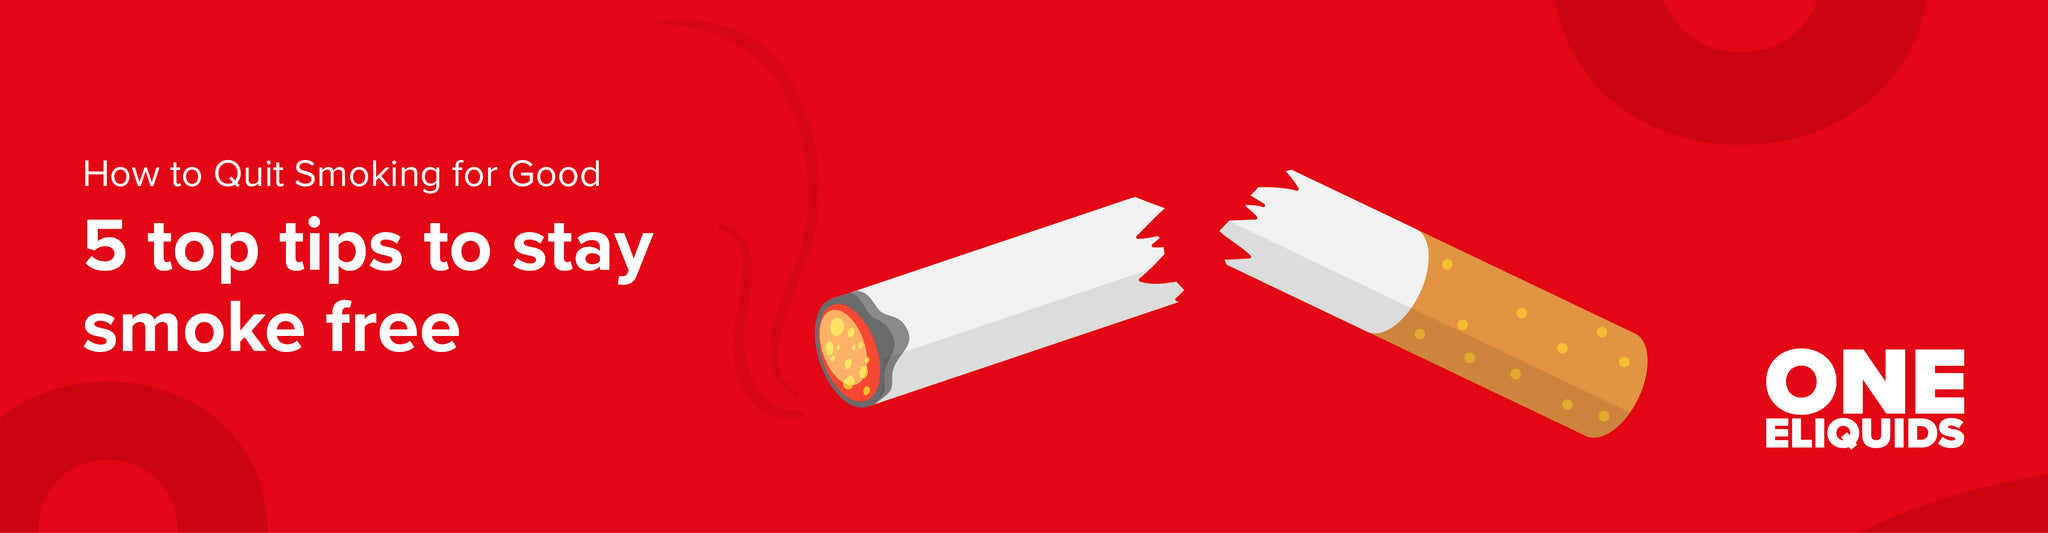 How to Quit Smoking for Good: 5 Top Tips to Stay Smoke-Free